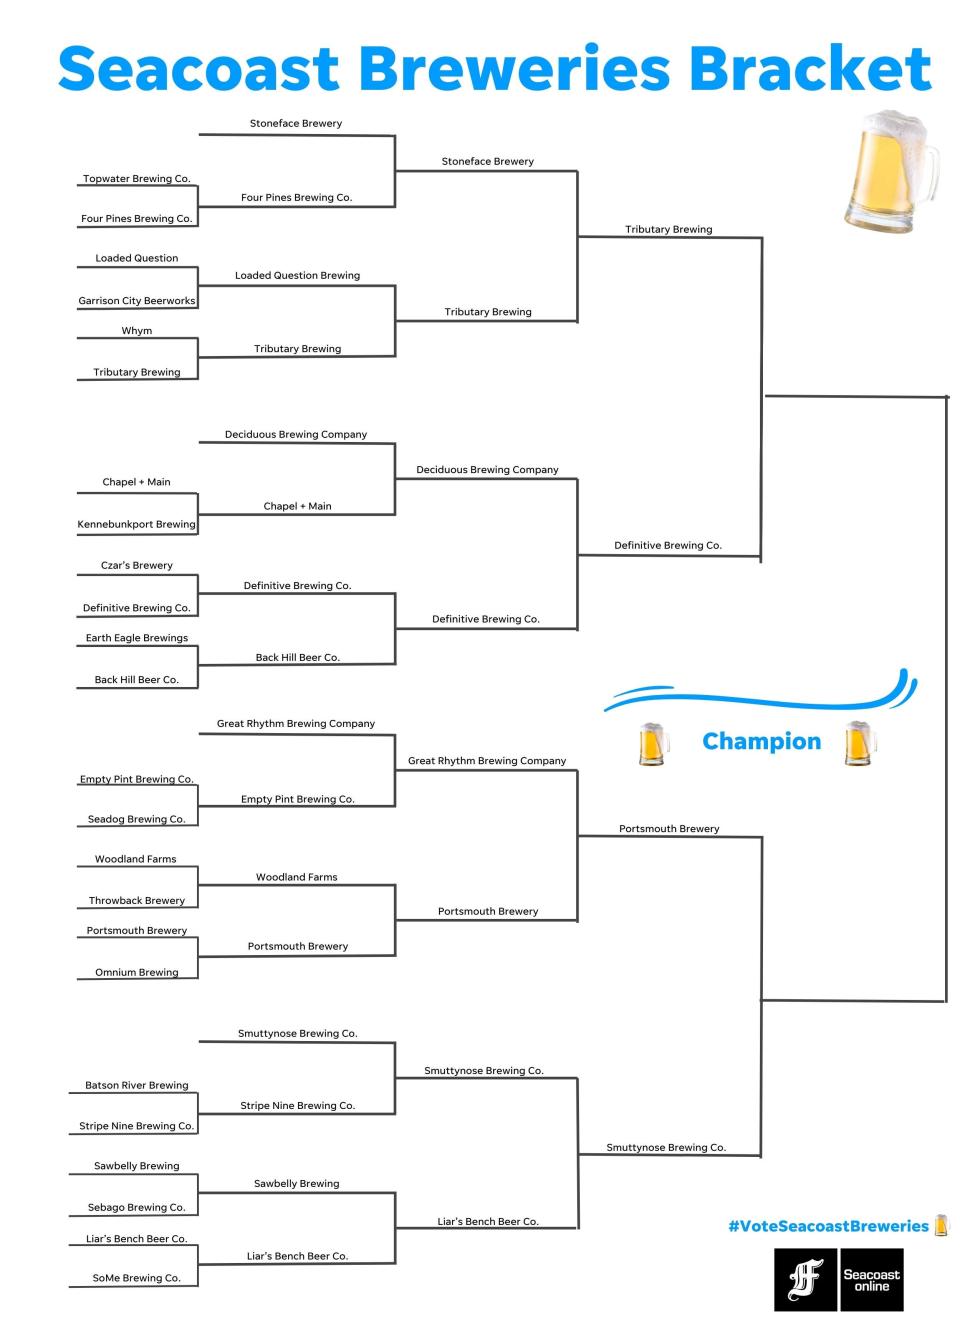 The Seacoast Breweries Bracket has reached the semifinal round.